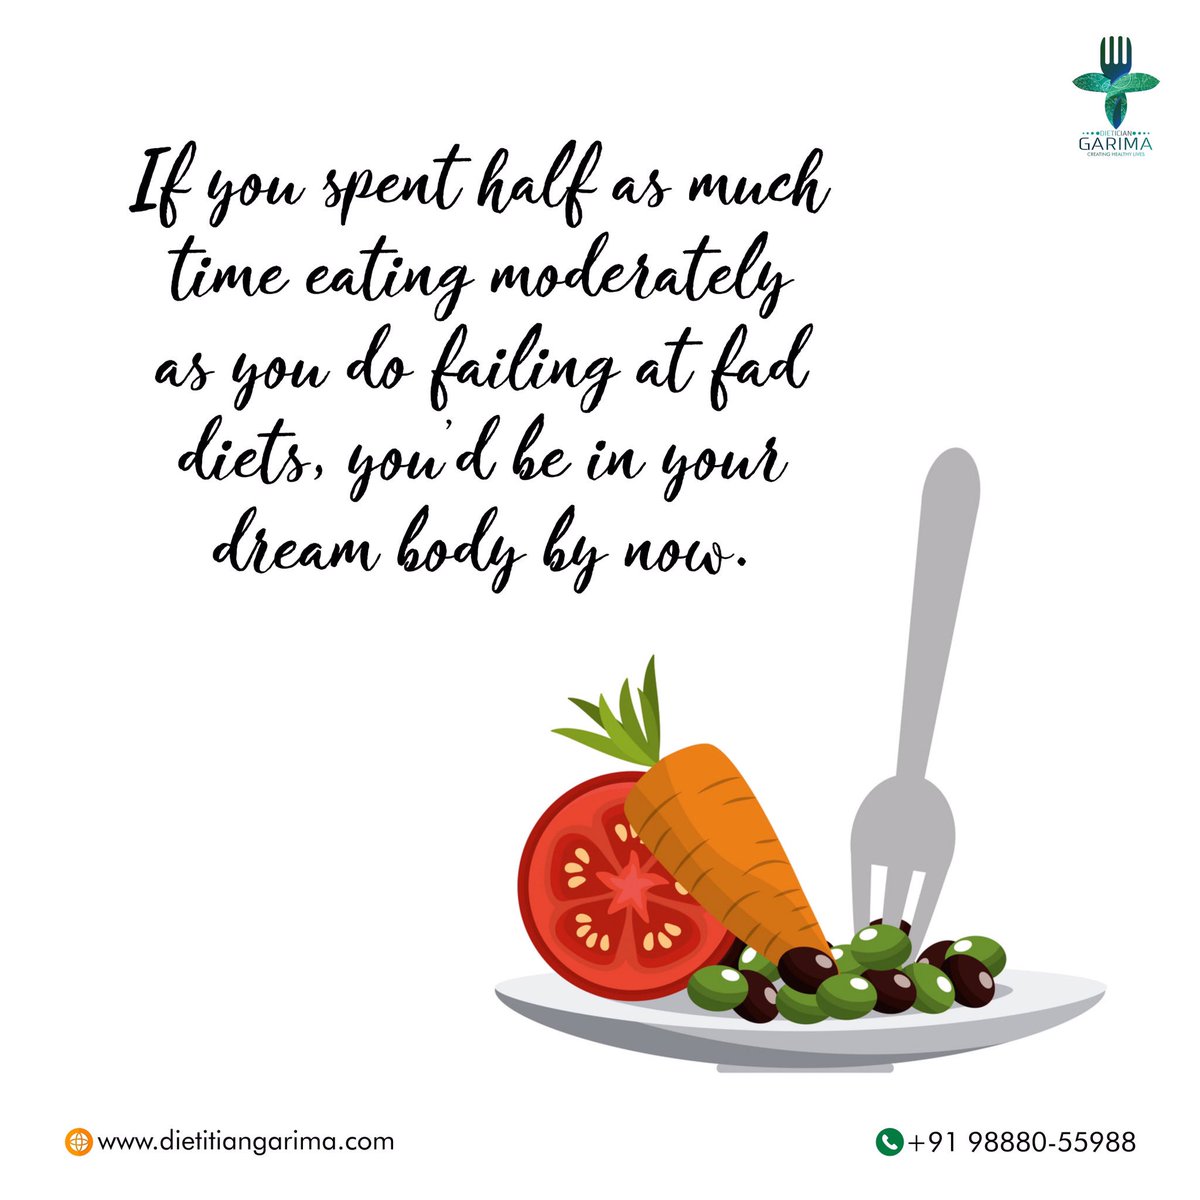 Say no to fad diets and learn to eat in moderation.

#nofaddiets #screwfaddiets #faddietsdontwork #balanceddiet #balanceddietbalancedlife #dreambody #moderationisthekey #dietitiangarima #creatinghealthylives